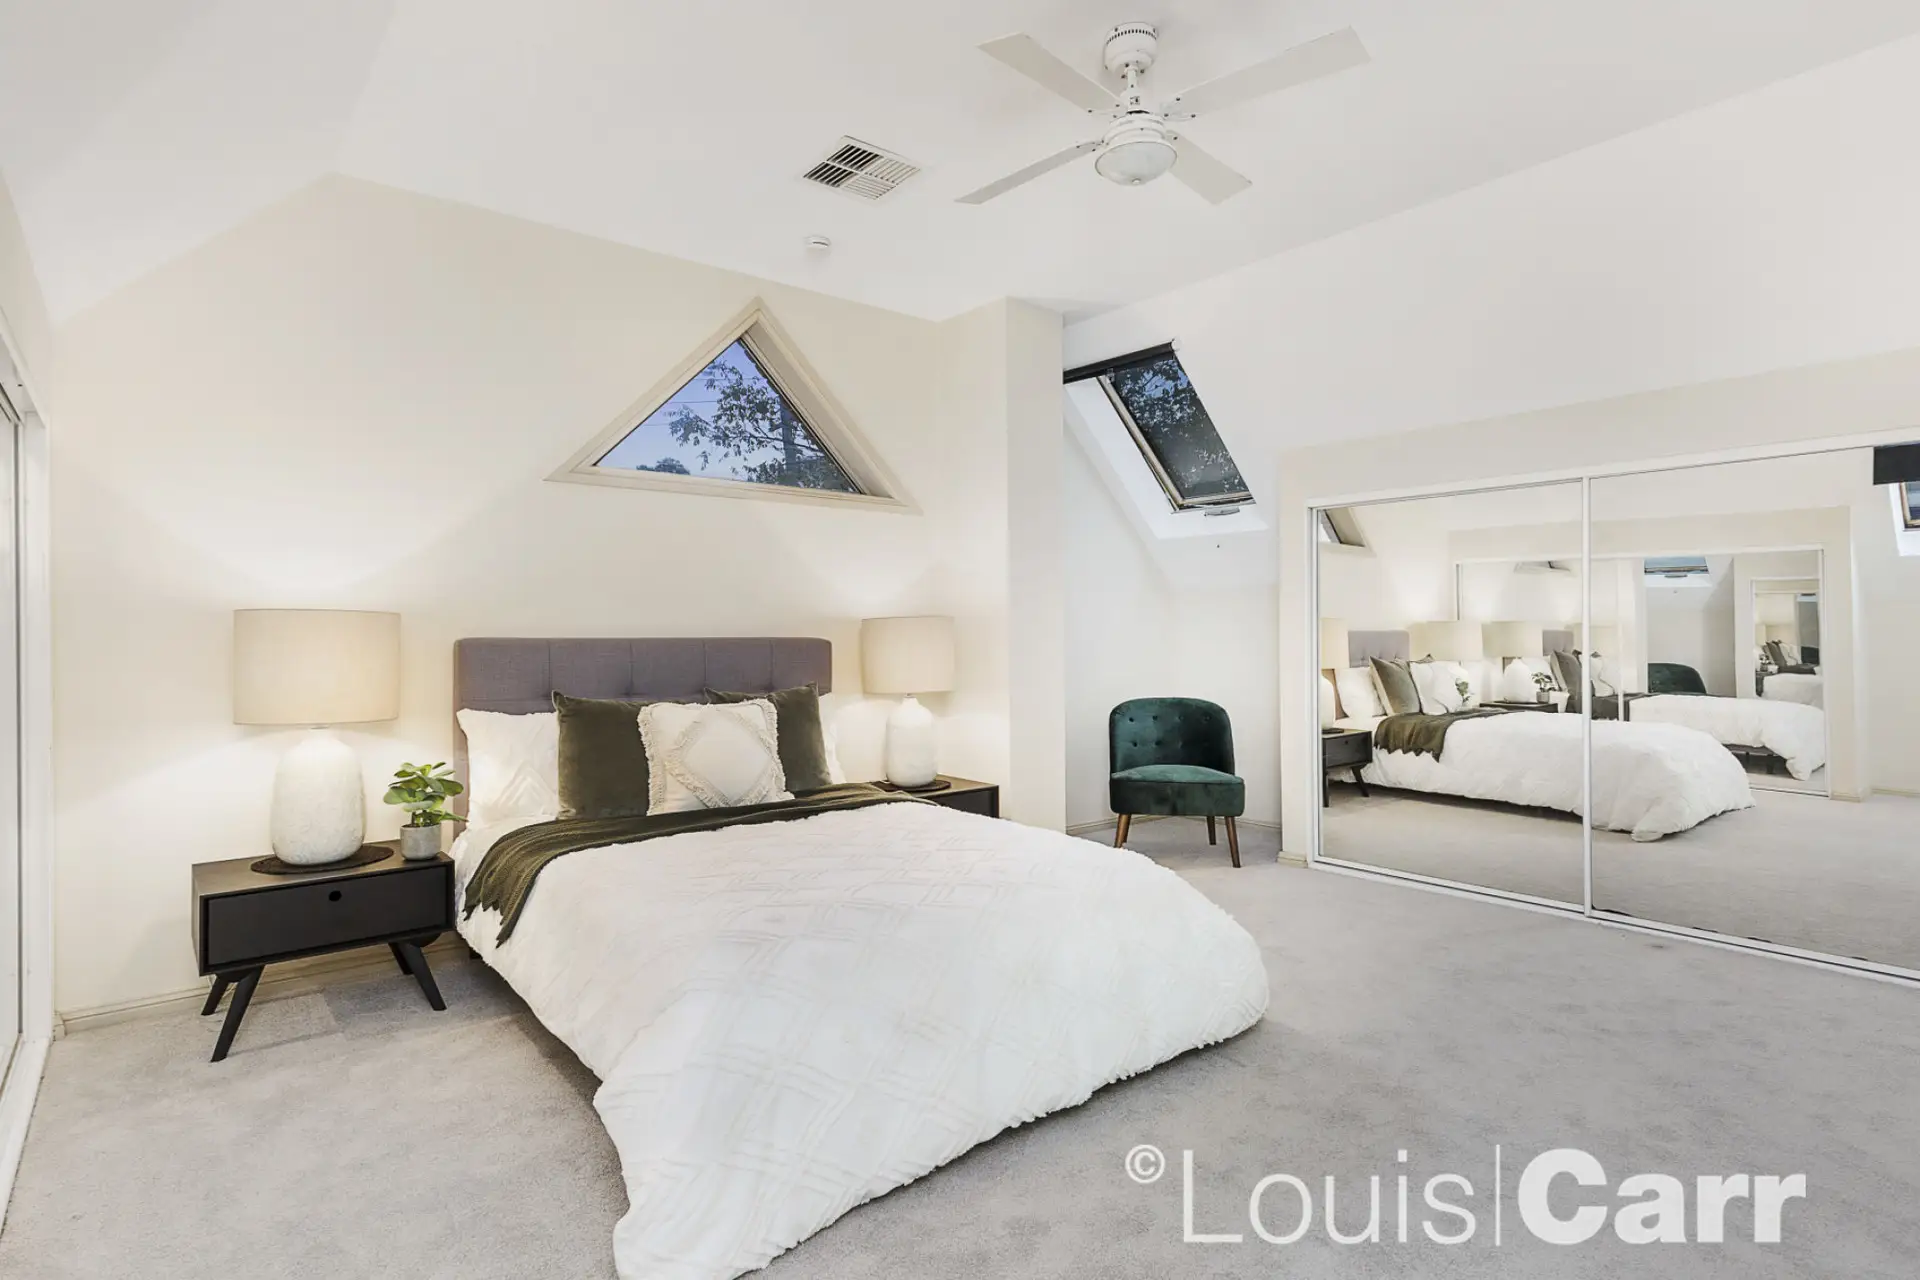 Photo #8: 14/83-93 Railway Street, Baulkham Hills - Sold by Louis Carr Real Estate